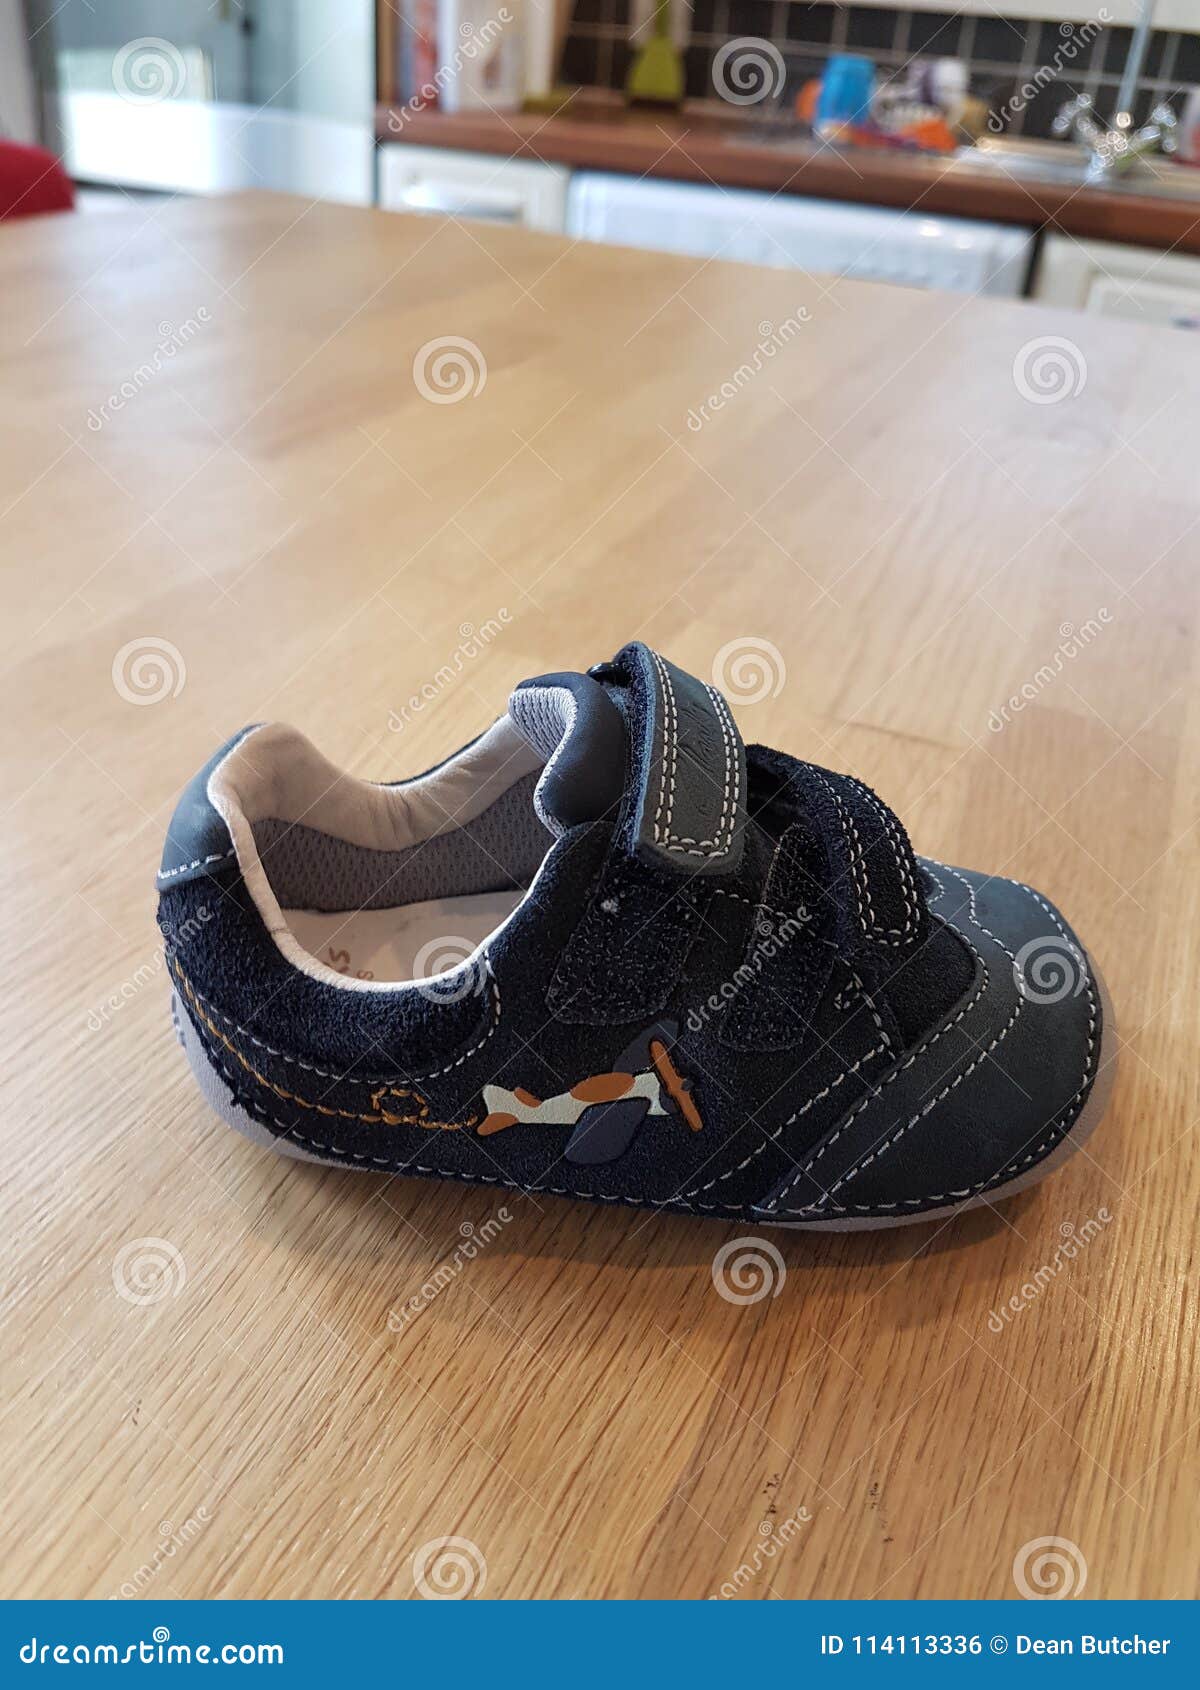 walking shoes for babies with small feet